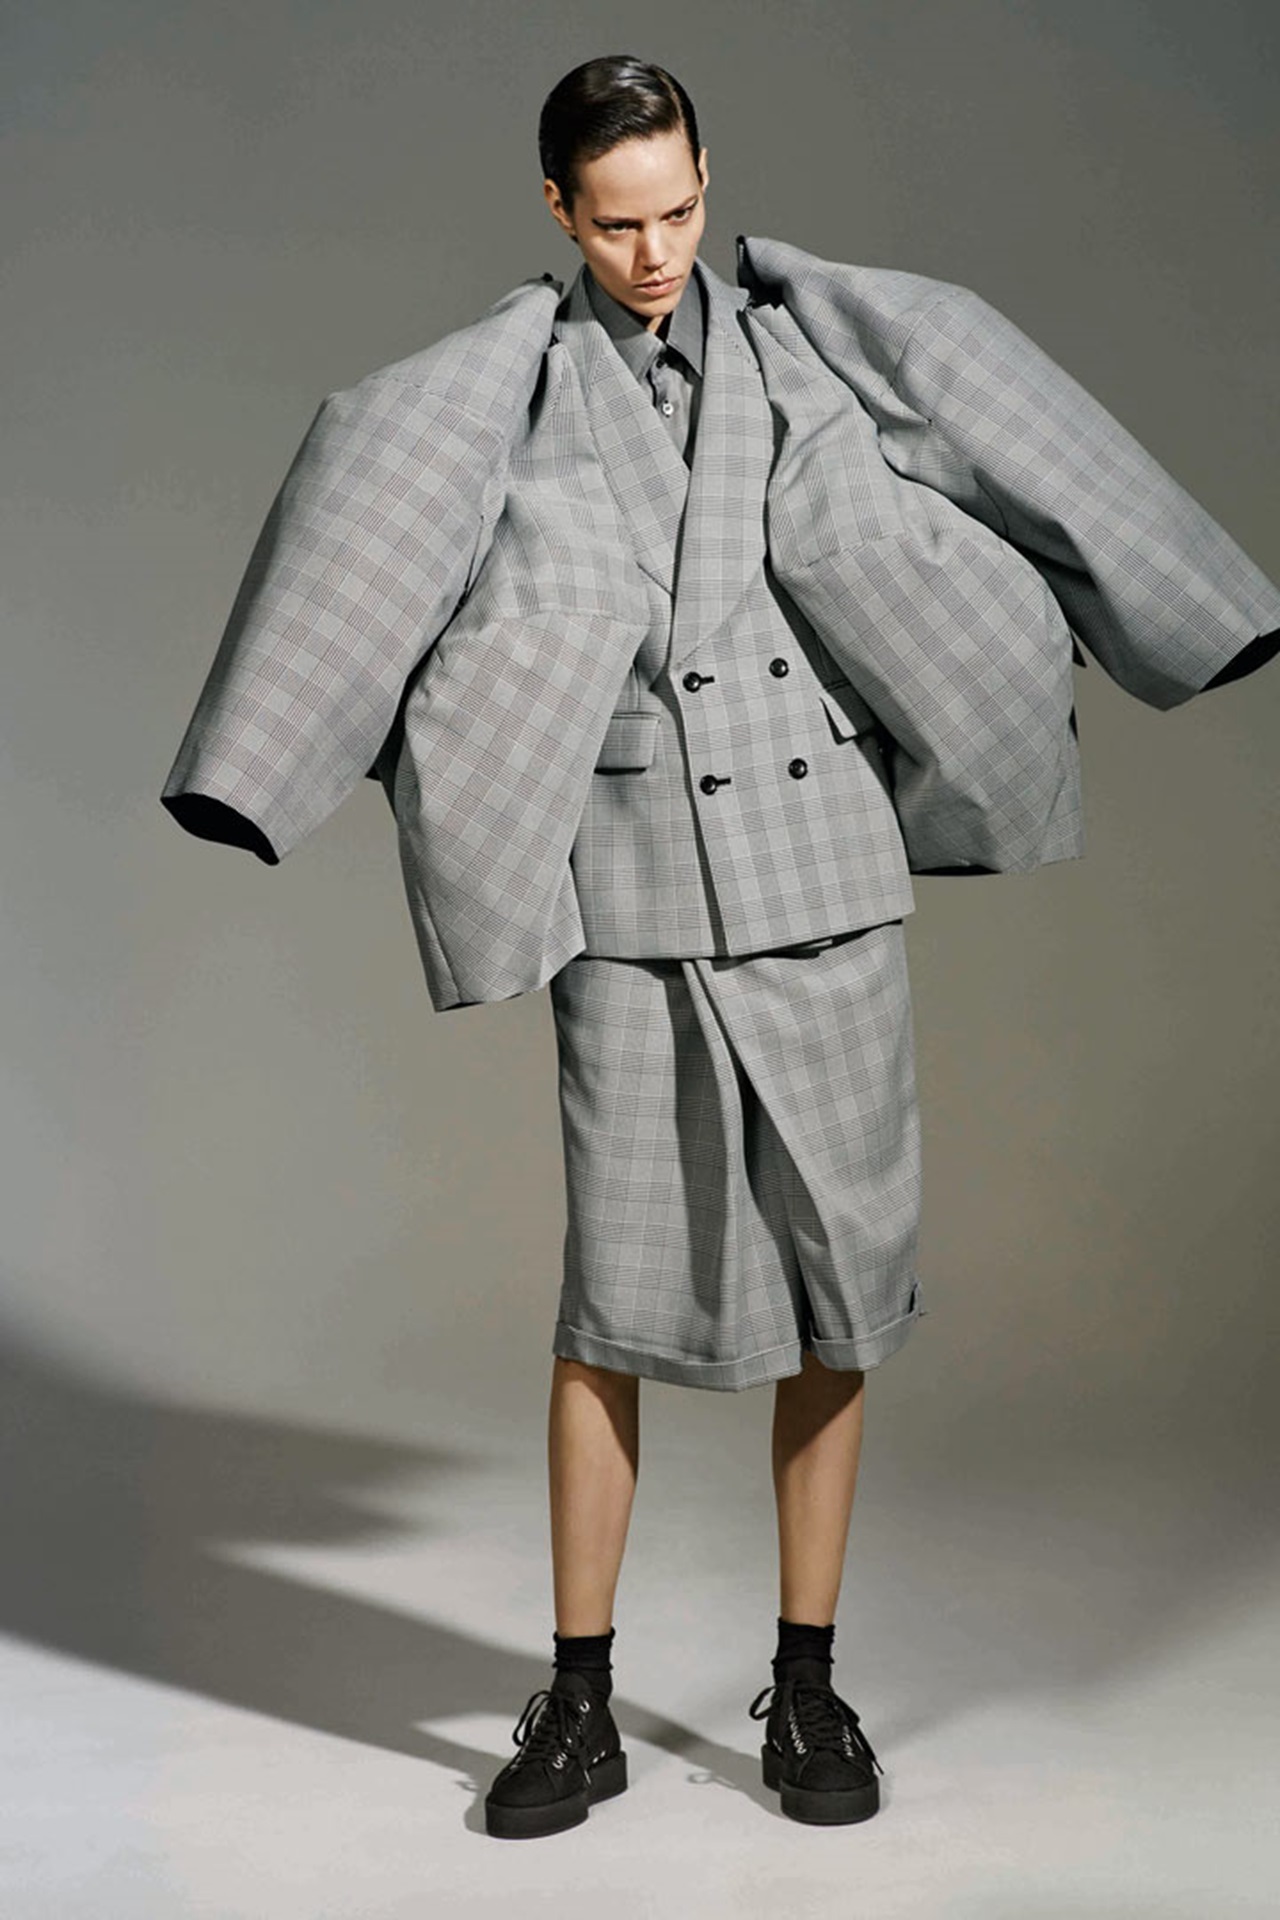 Rei Kawakubo (Japanese, born 1942) for Comme des Garçons (Japanese, founded 1969). The Infinity of Tailoring, autumn/winter 2013–14; Courtesy of Comme des Garçons. Photograph by © Collier Schorr